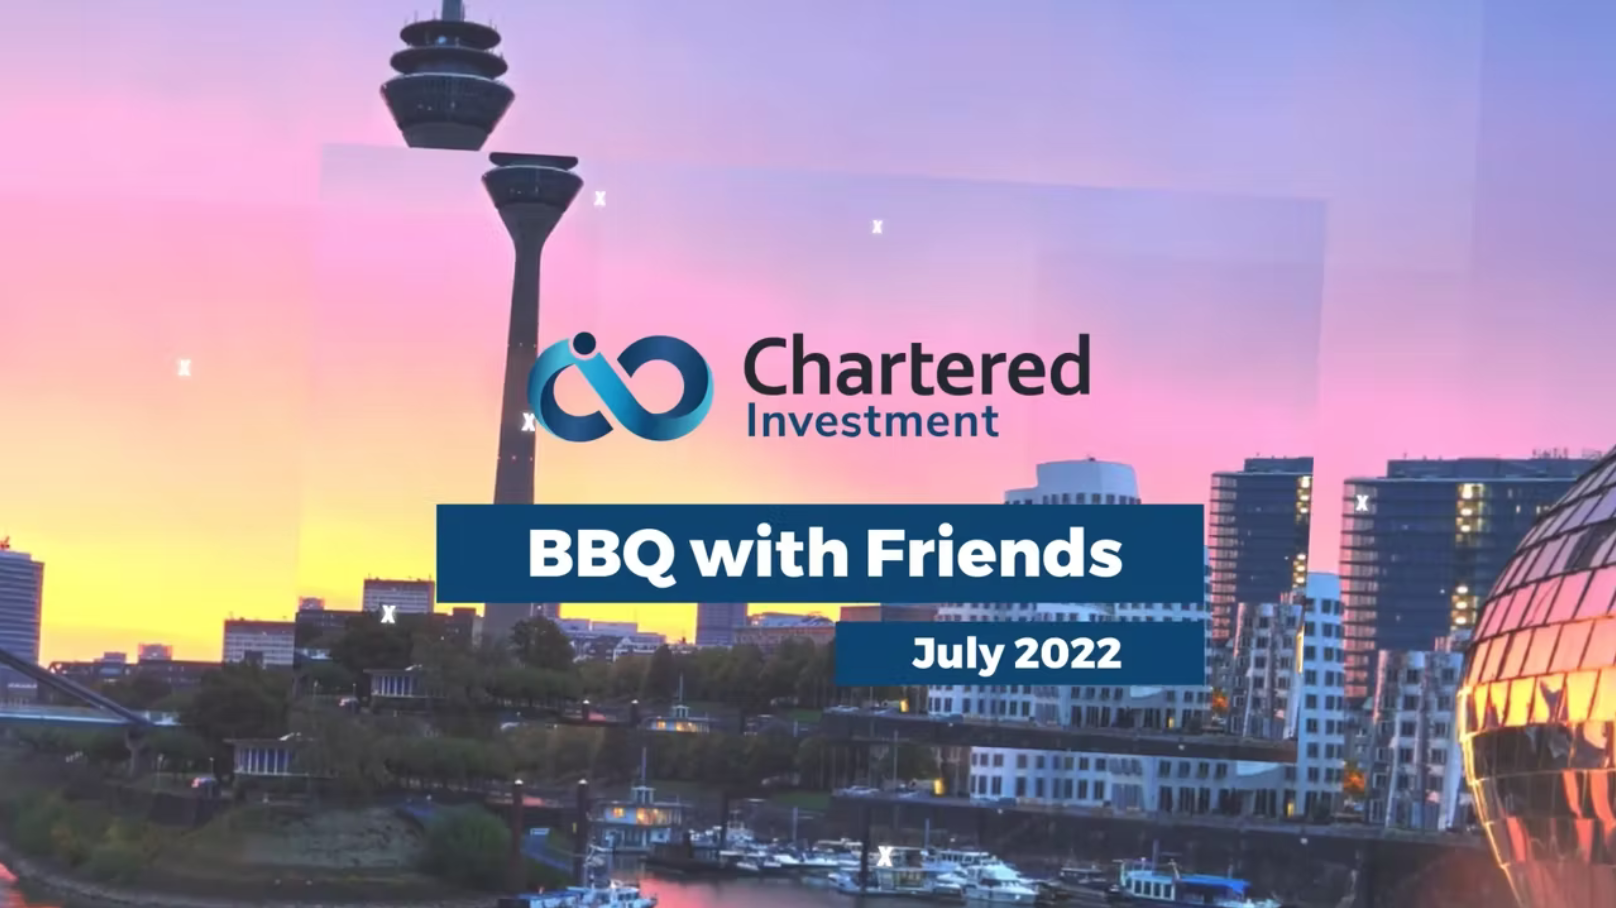 Video trailer of the Chartered Investment BBQ 2022